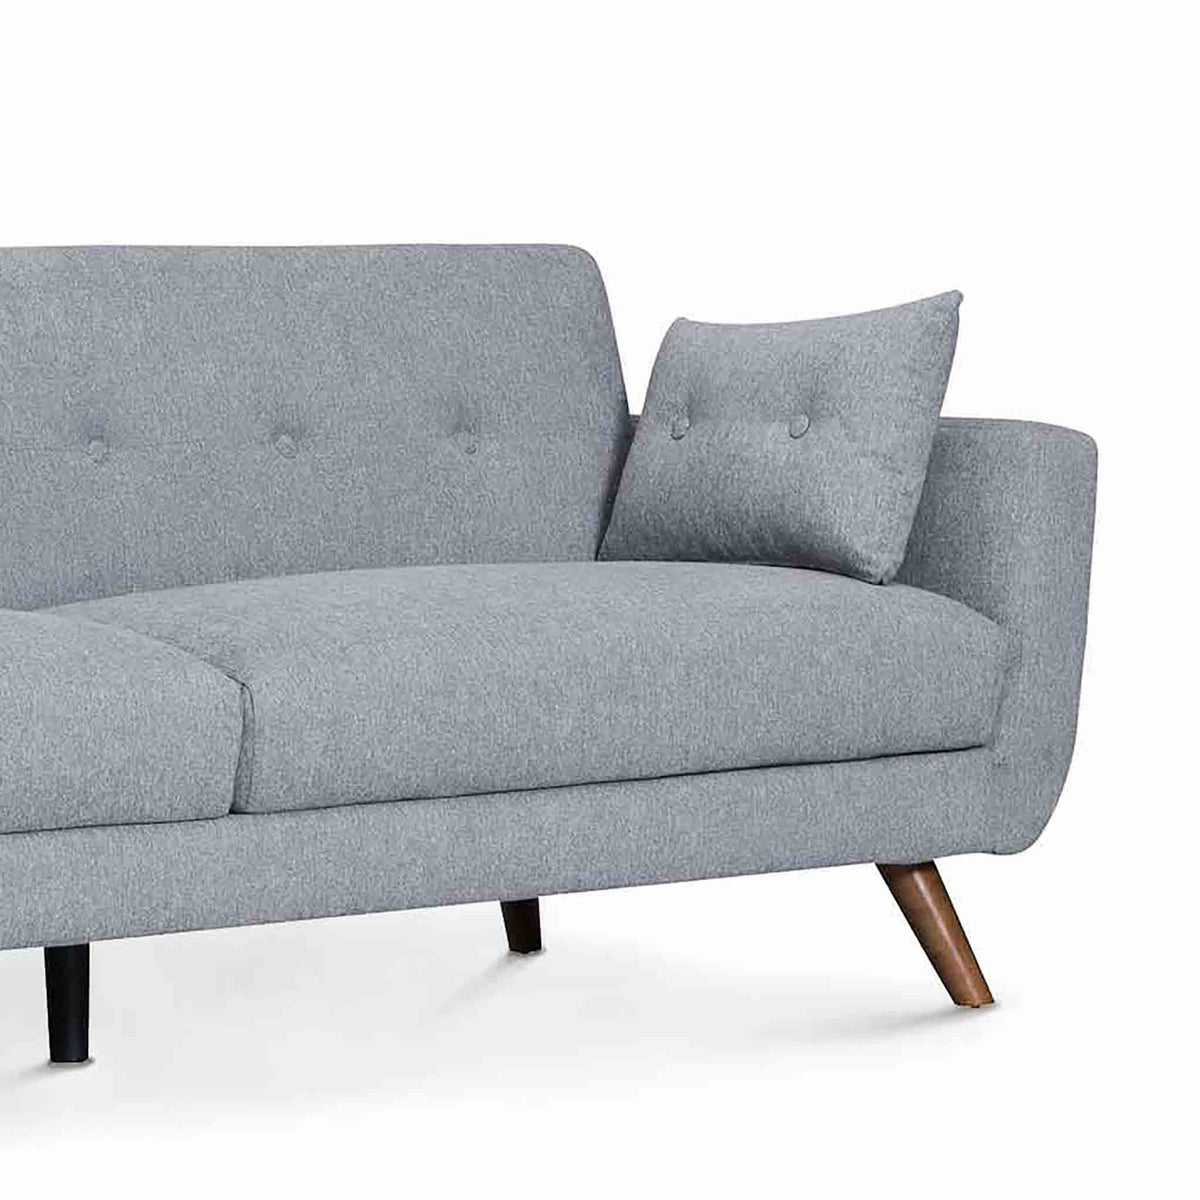 Trom Grey 3 Seater Sofa Bed - Close up of arm rest